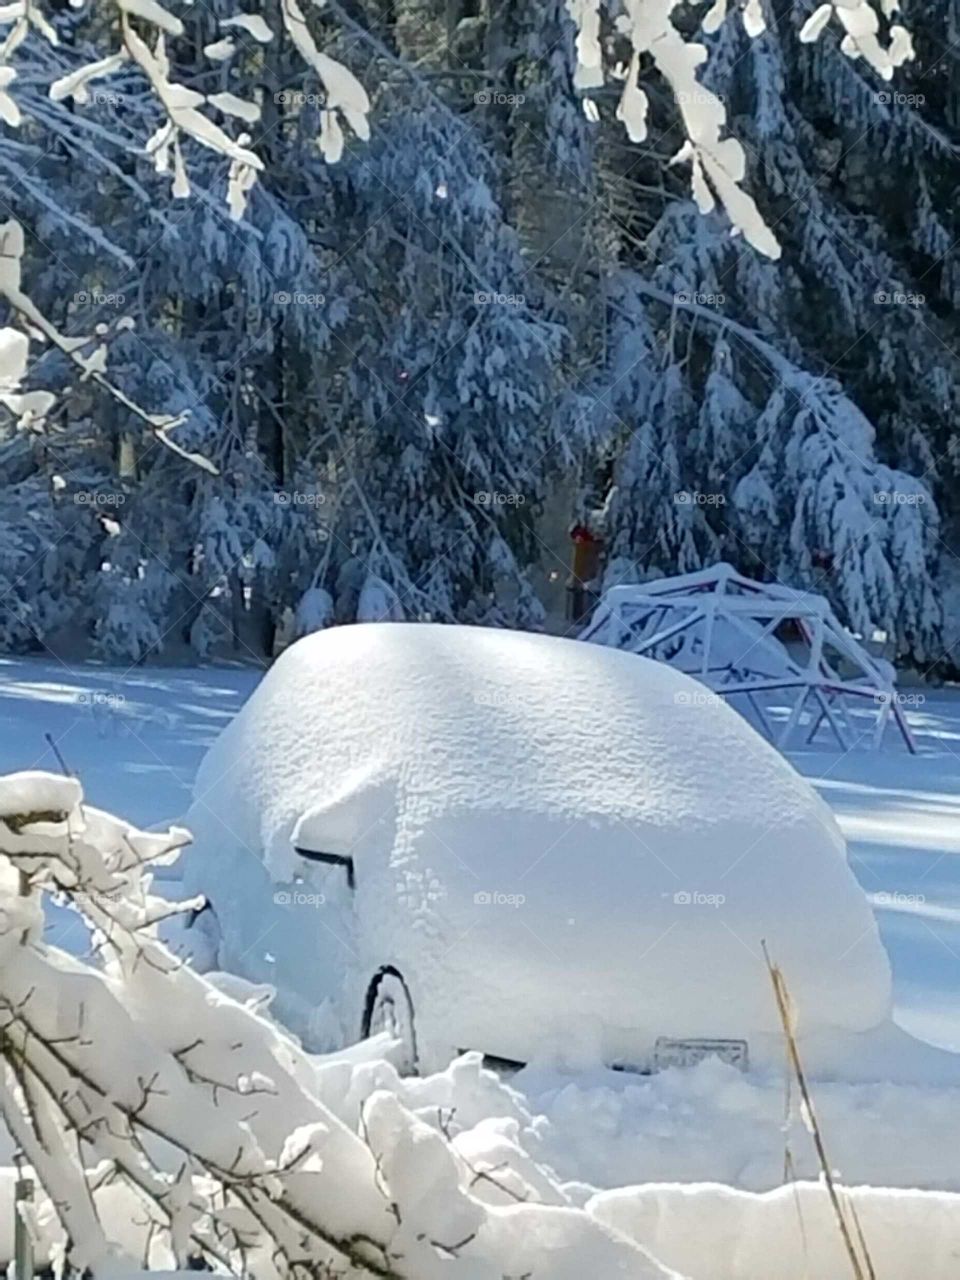 Car covered with icy snow after storm looking like a big snowball, one wheel showing.